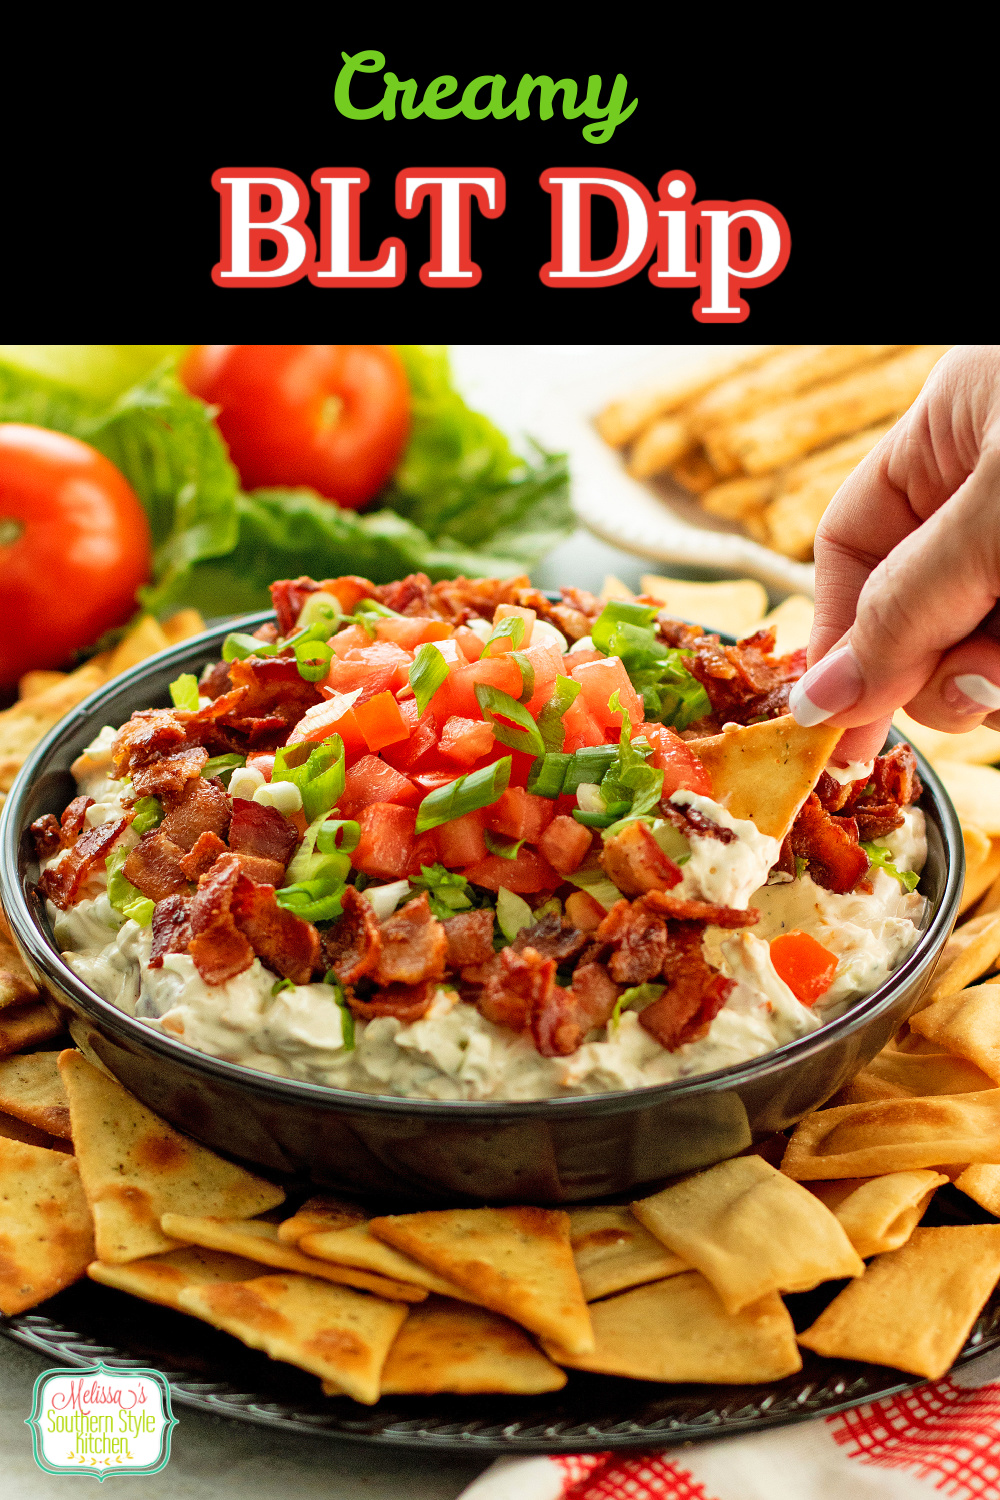 This creamy BLT Dip recipe features classic flavors making it a delicious dip to serve with crostini, garlic bread or pita chips for dipping. #BLT #BLTdip #diprecipes #bacon #bacondip #superbowlrecipes #easydiprecipes